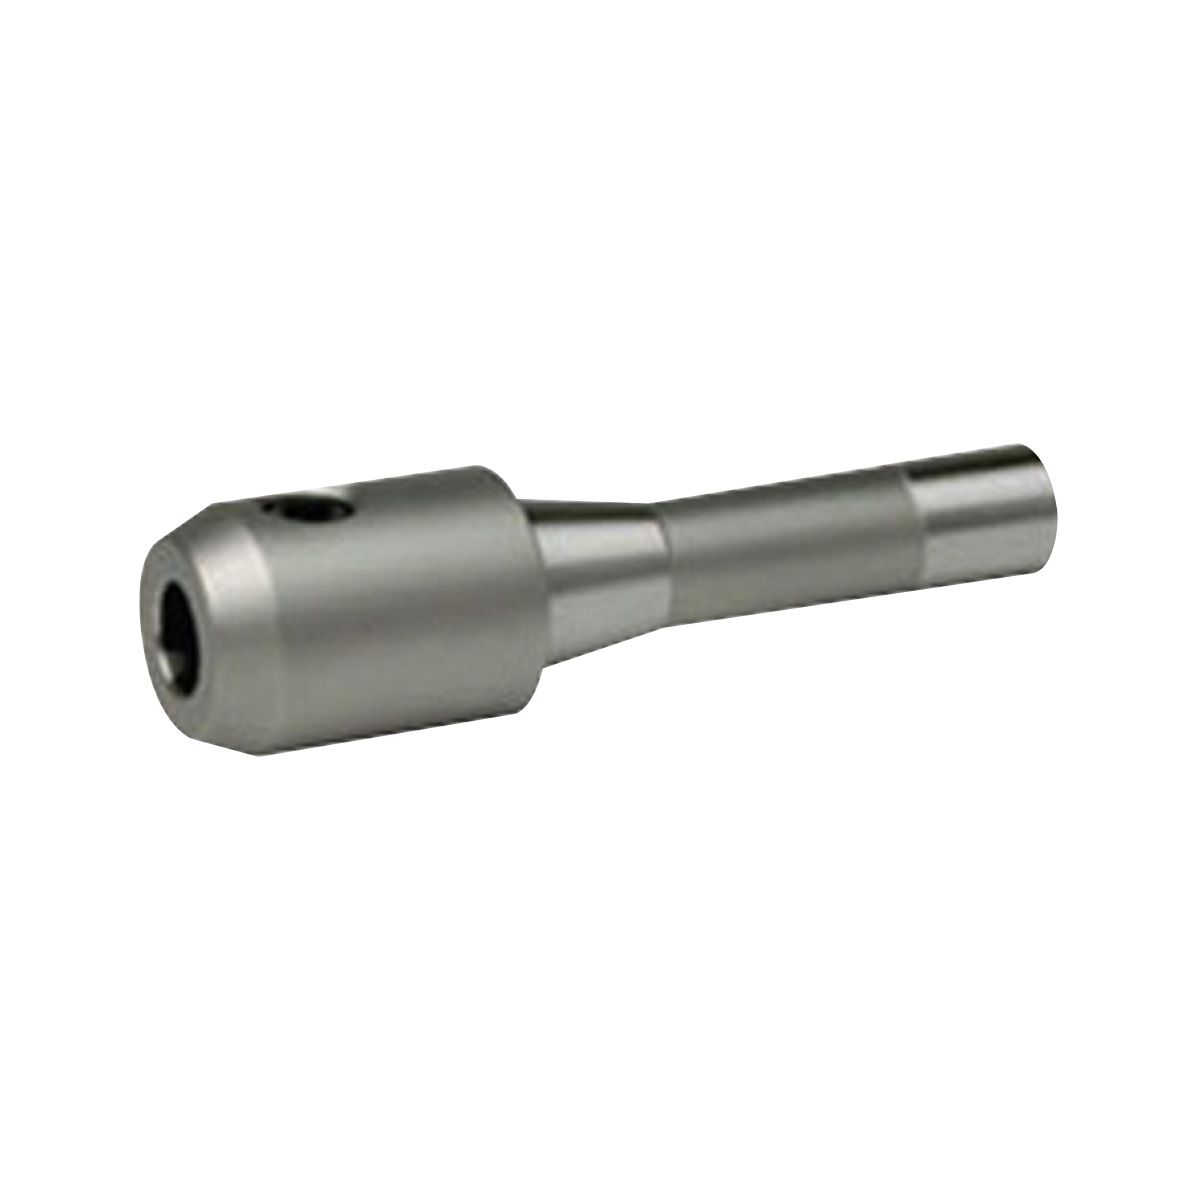 1/8" R8 END MILL HOLDER-PRO SERIES  (3901-0100)